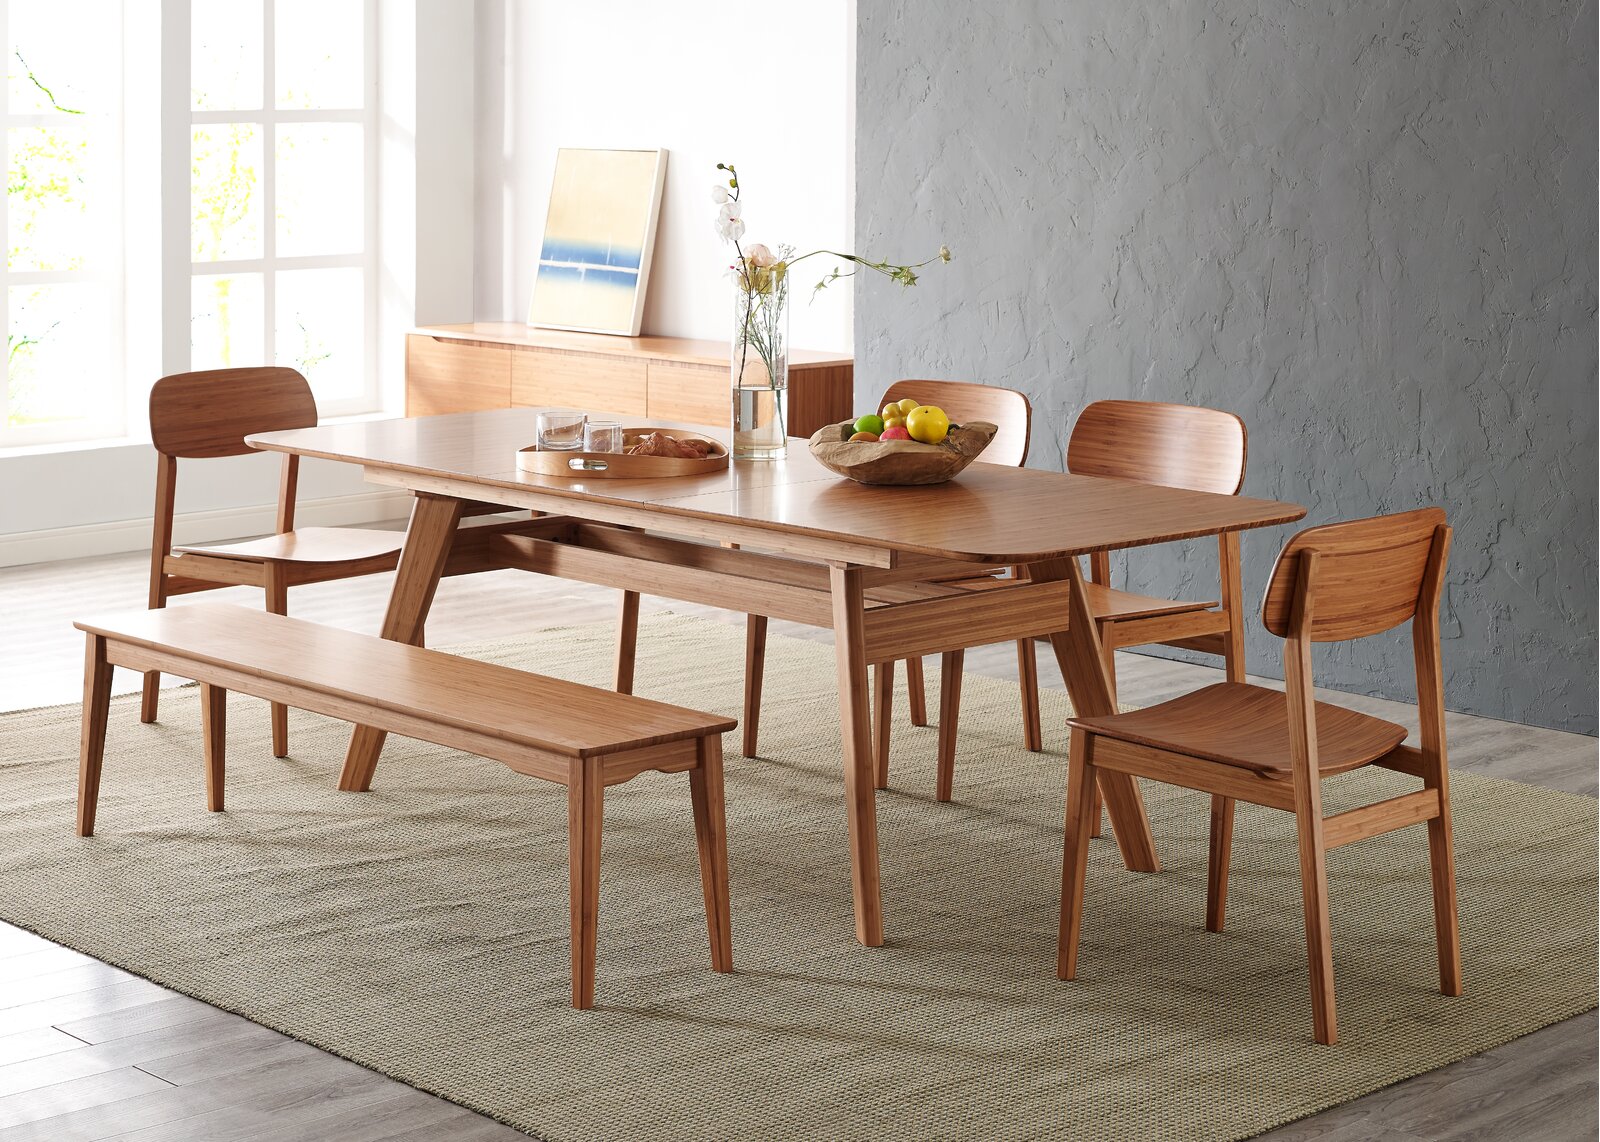 Bellaire Extendable Bamboo Solid Wood Dining Table holiday extension tables | padsyle.com